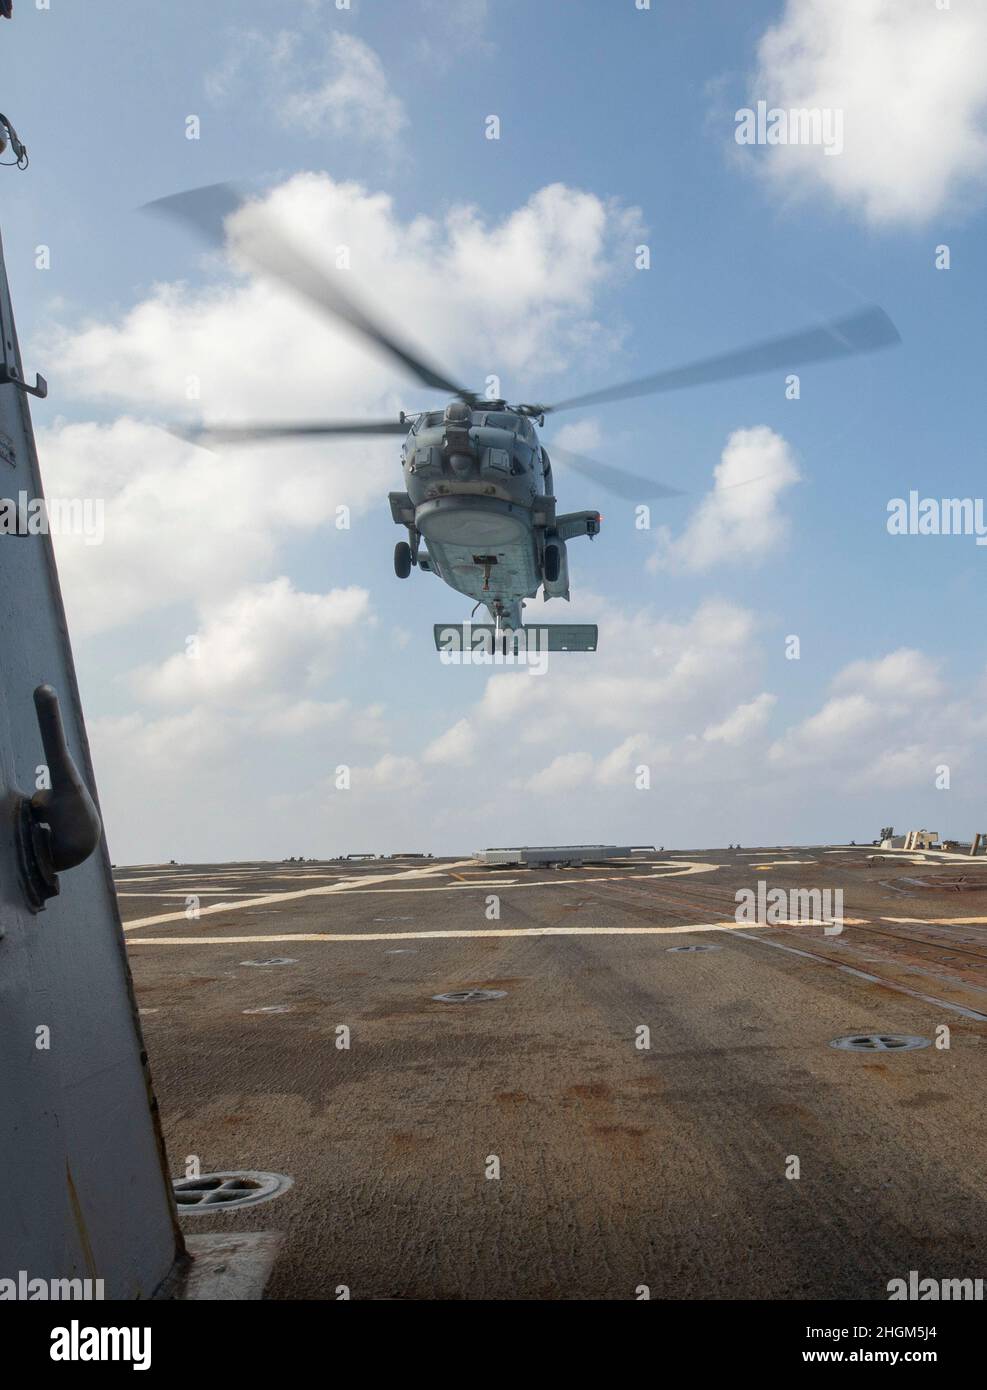 SOUTH CHINA SEA (Jan. 19, 2022) An MH-60R helicopter lifts off the deck of Arleigh Burke-class guided-missile destroyer USS Ralph Johnson (DDG 114) during flight operations. Ralph Johnson is assigned to Task Force 71/Destroyer Squadron (DESRON) 15, the Navy’s largest forward-deployed DESRON and the U.S. 7th fleet’s principal surface force. (U.S. Navy photo by Mass Communication Specialist 2nd Class Samantha Oblander) Stock Photo